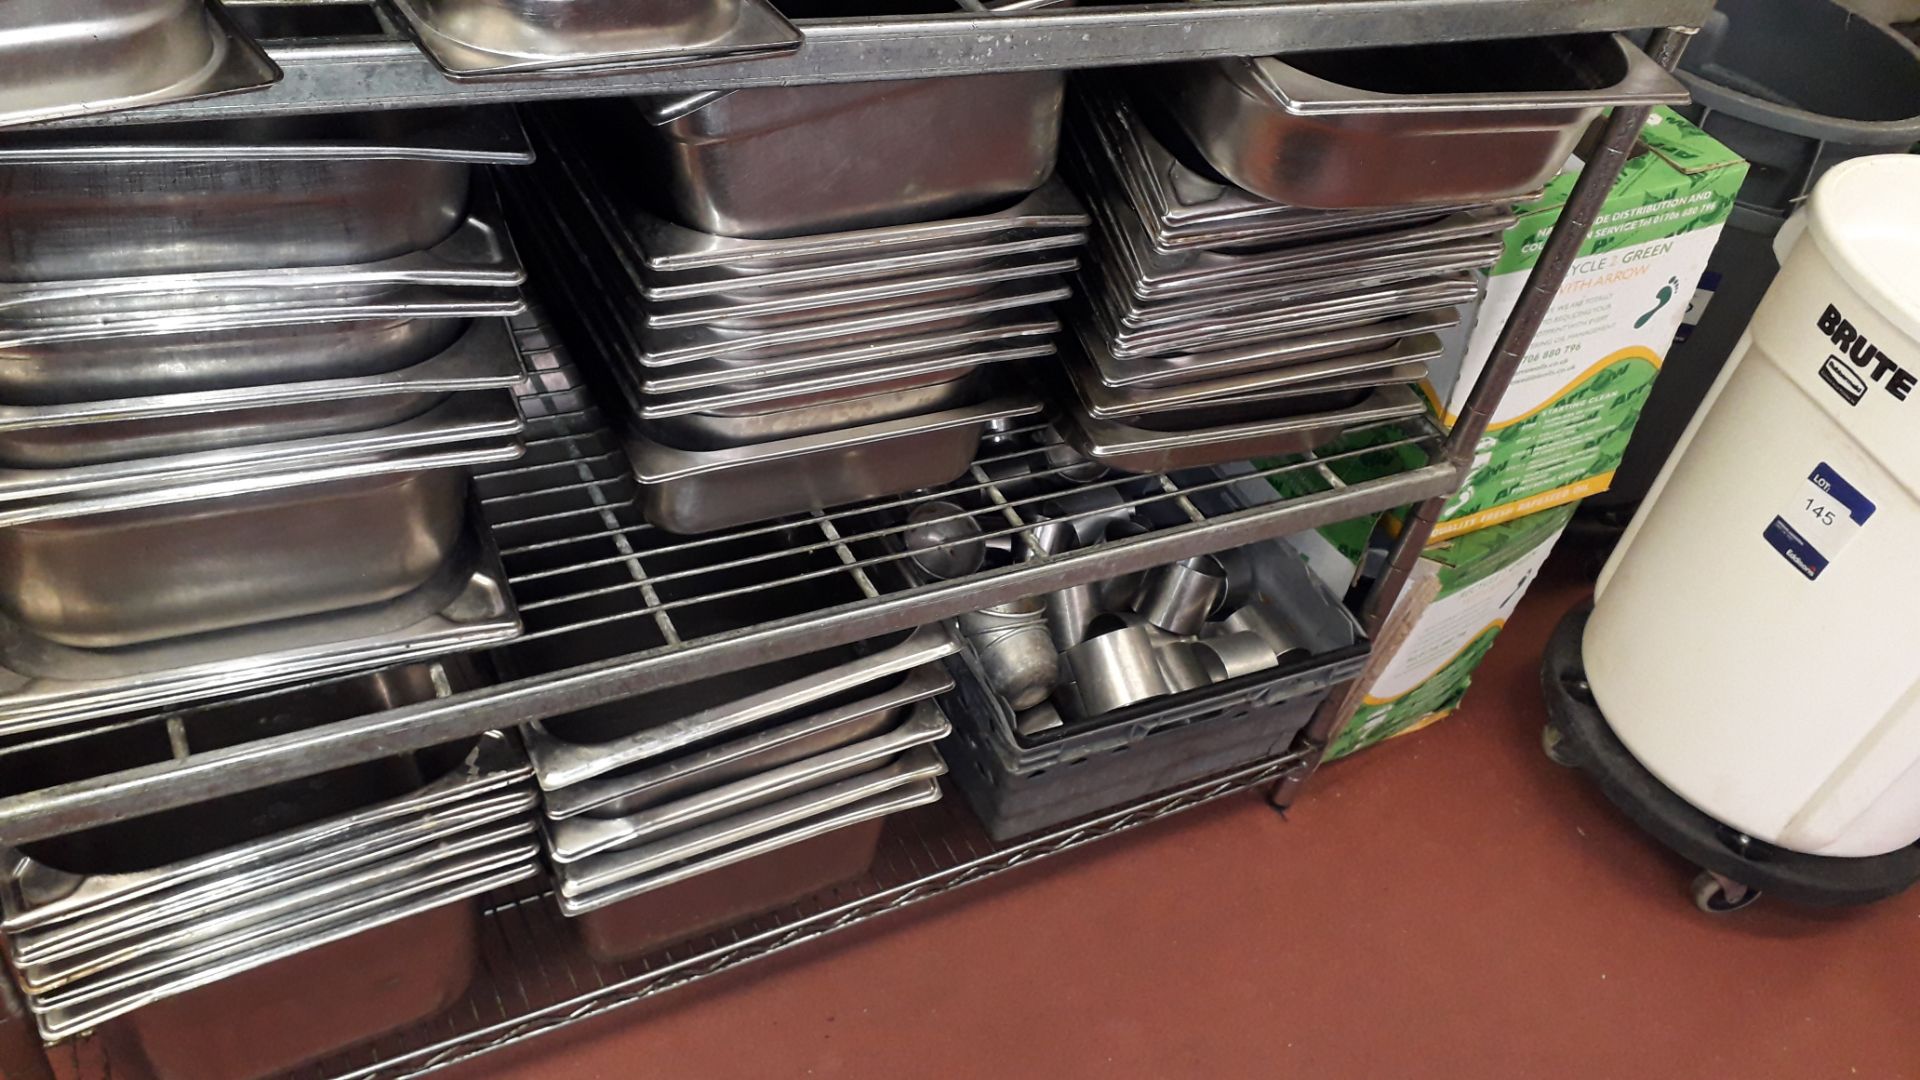 Large Quantity of Stainless Steel Gastronorme and other Trays to Kitchen - Image 3 of 8